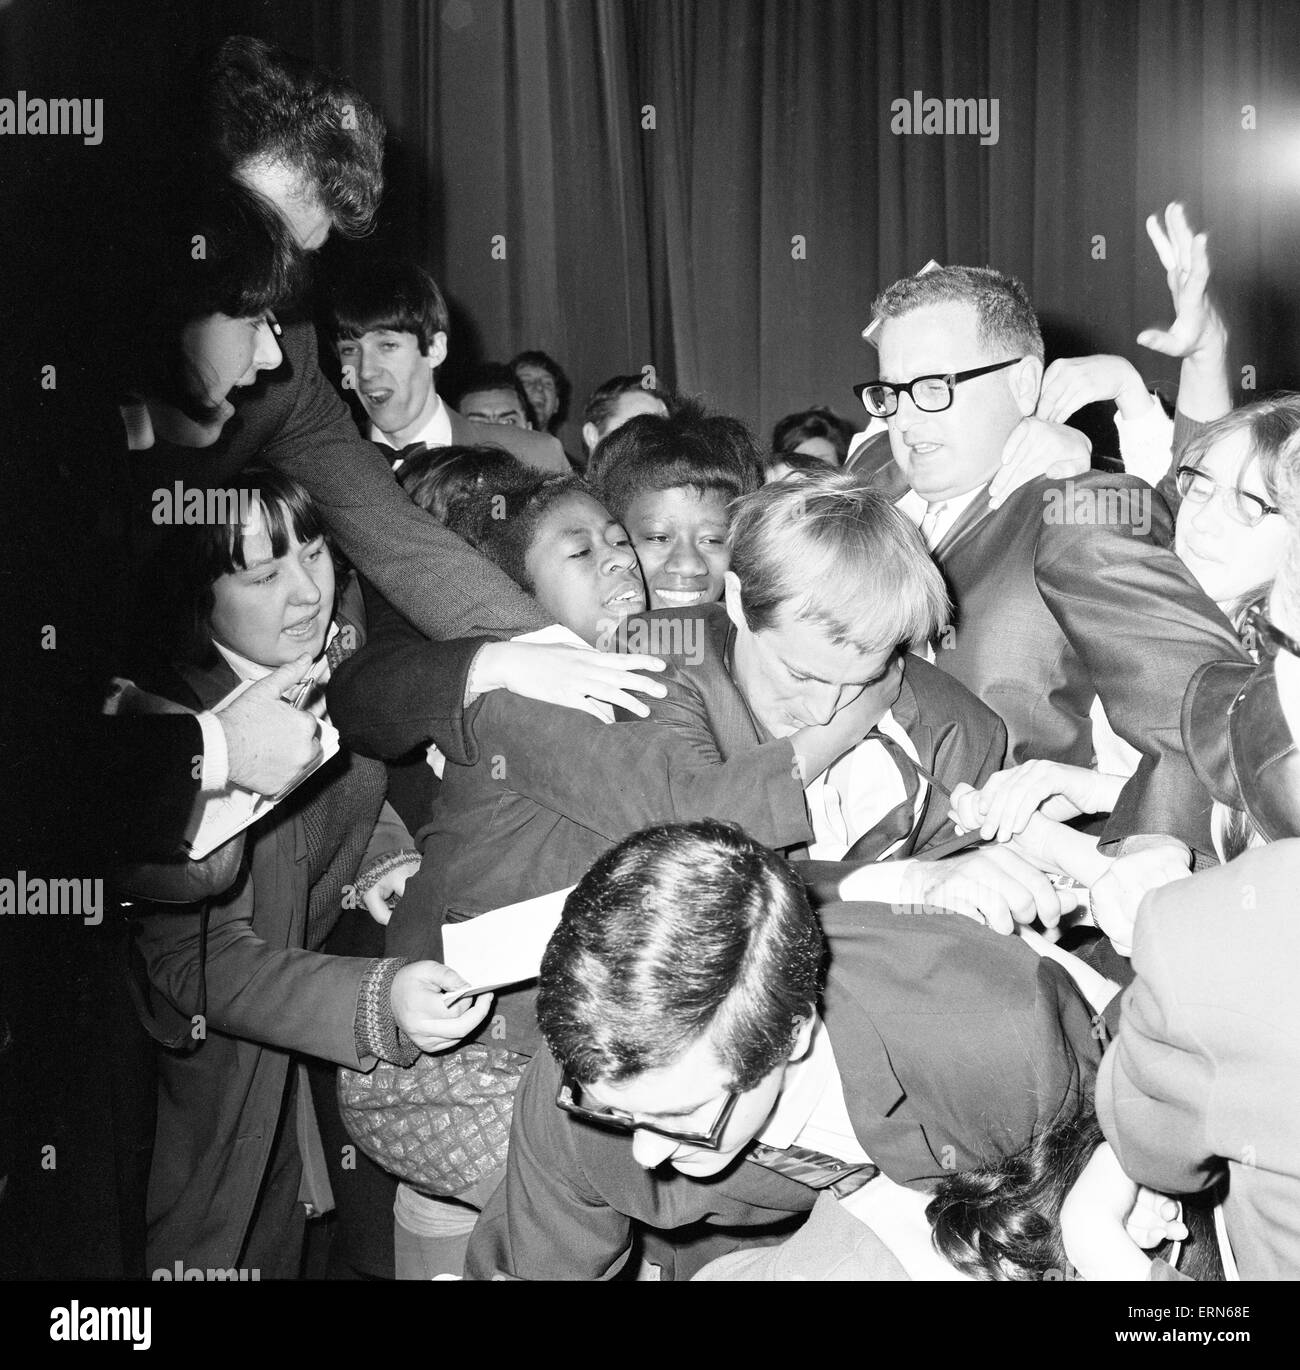 David McCallum, actor who plays the role of secret agent Illya Kuryakin in NBC show The Man from U.N.C.L.E., mobbed by screaming teenagers while attending news press conference at the Empire Cinema, Leicester Square, London, 17th March 1966. UK Promotion Stock Photo